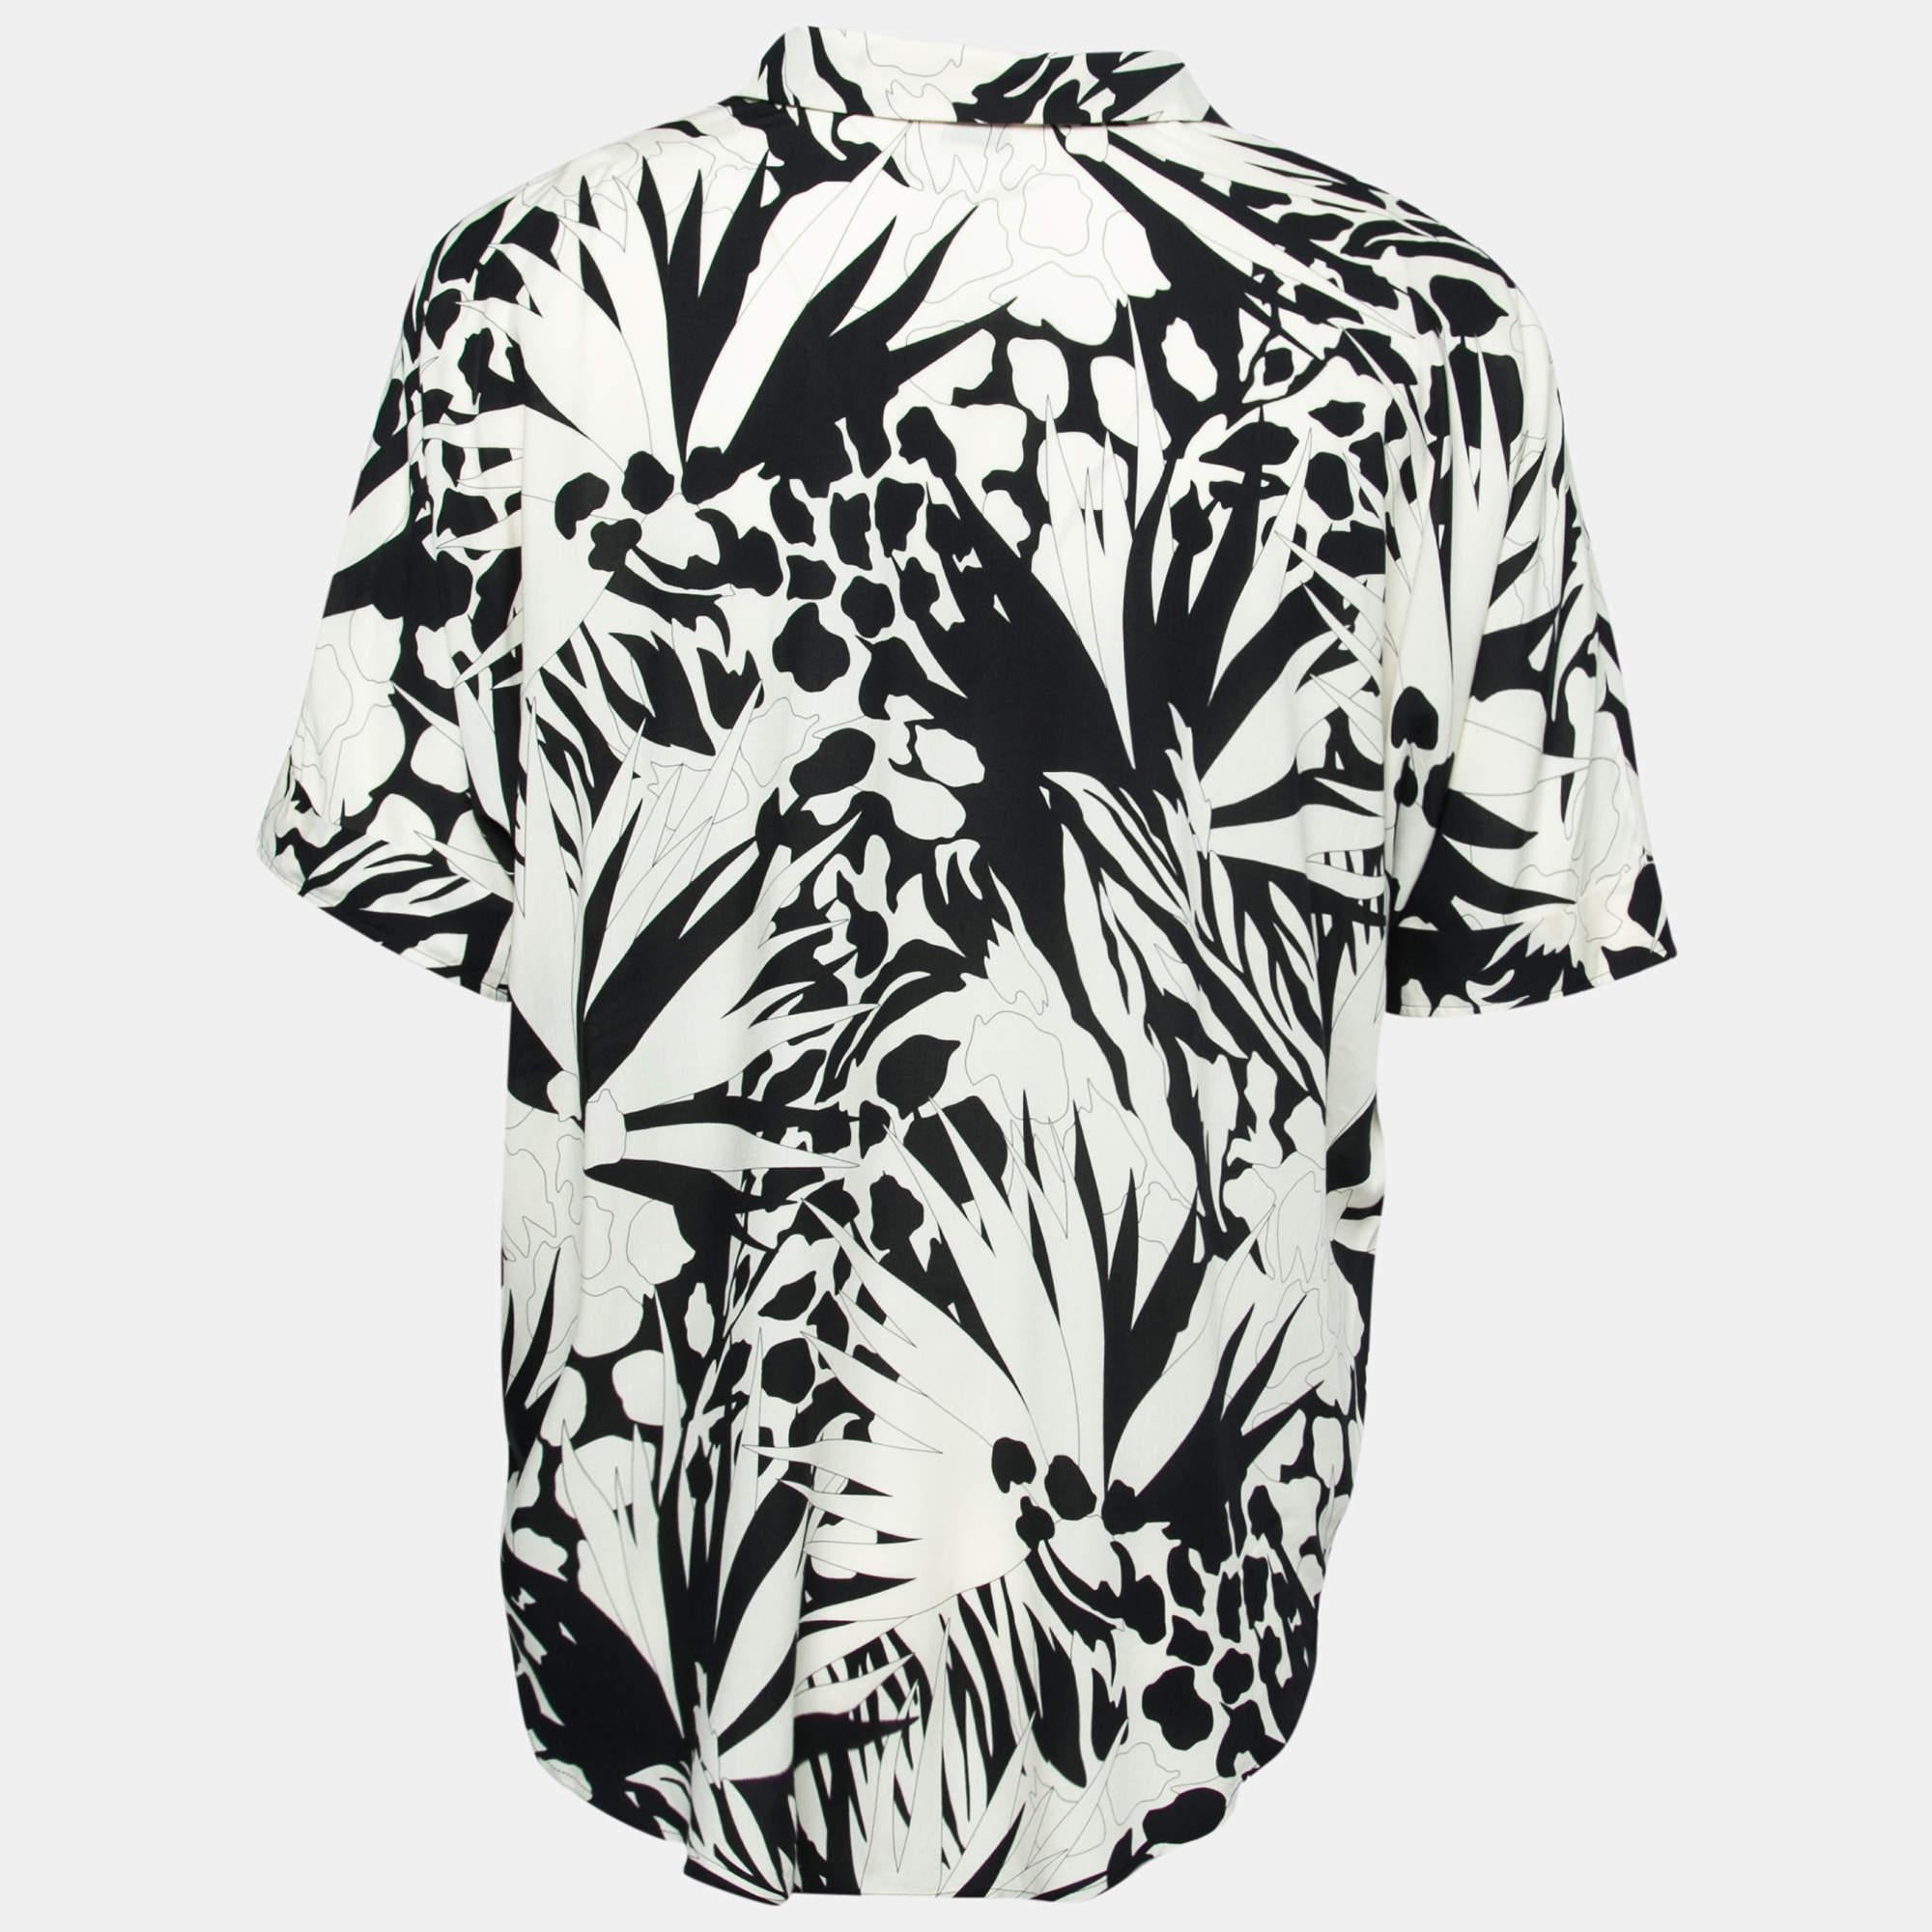 The fine artistry of this shirt exhibits Saint Laurent's years of impeccable craftsmanship in tailoring. The creation is laid with Jungle patterns in white and black shades. It has a classic collar and a straight hem that gives the shirt a relaxed